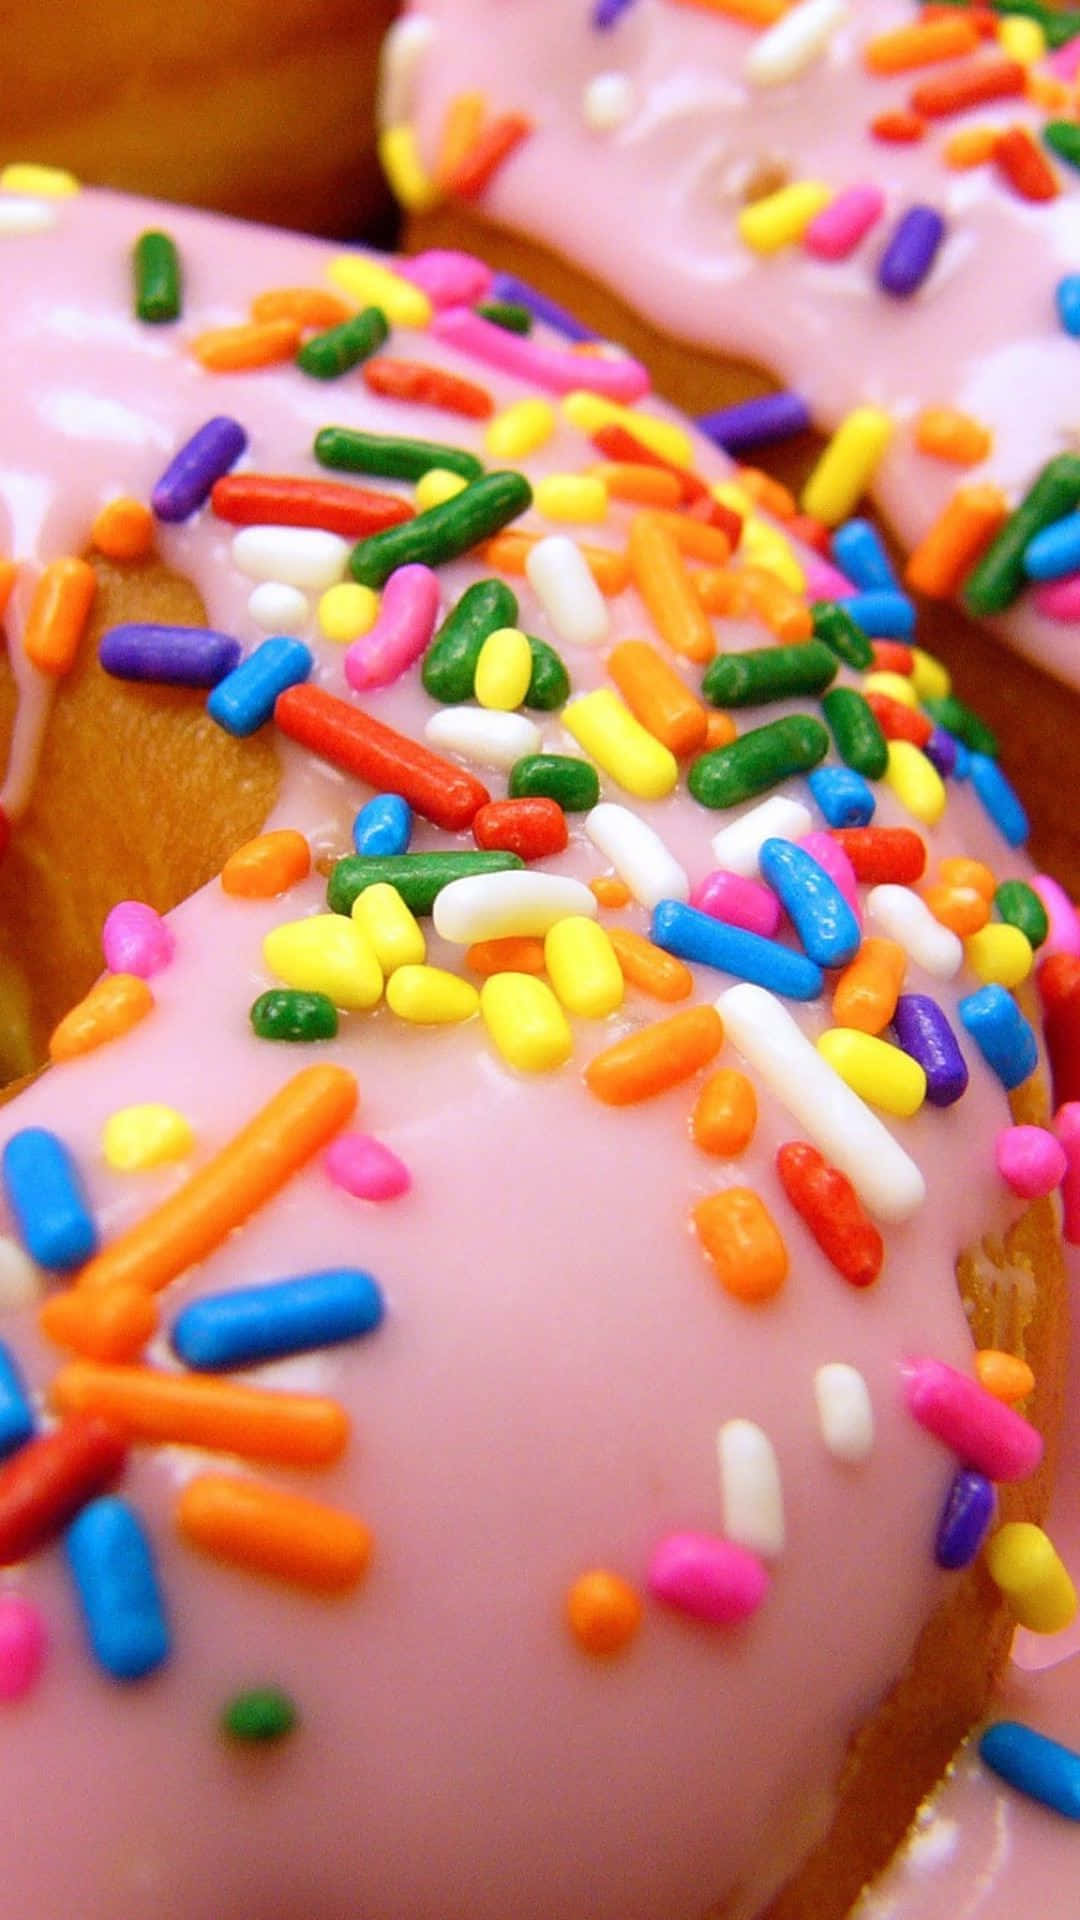 Pink Doughnut Android Food Background